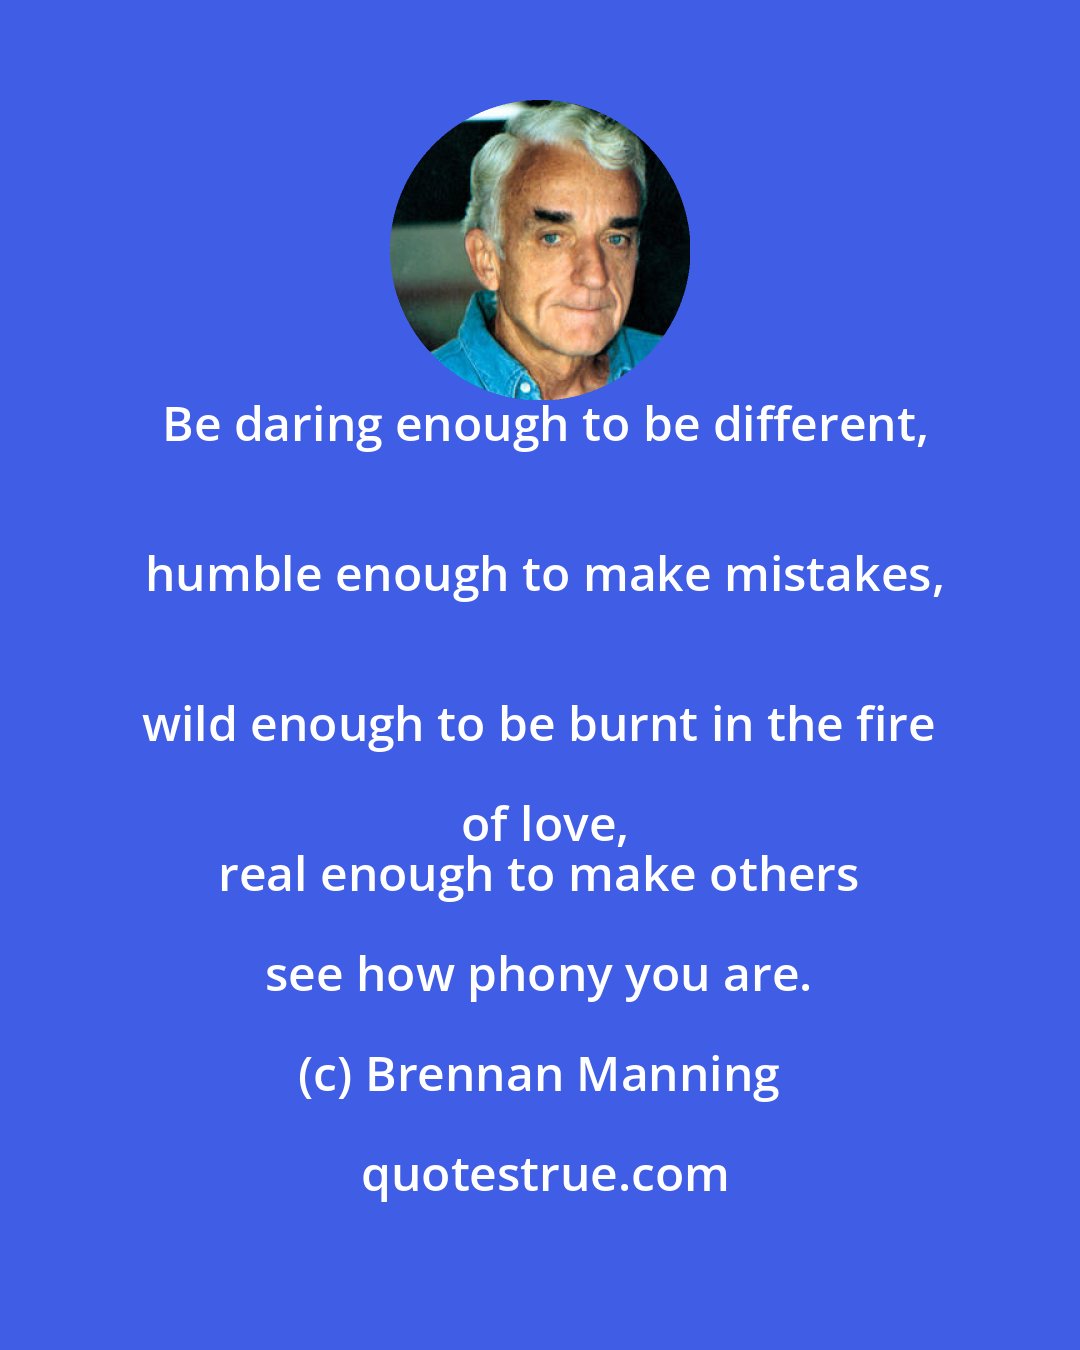 Brennan Manning: Be daring enough to be different,
 humble enough to make mistakes,
 wild enough to be burnt in the fire of love,
 real enough to make others see how phony you are.